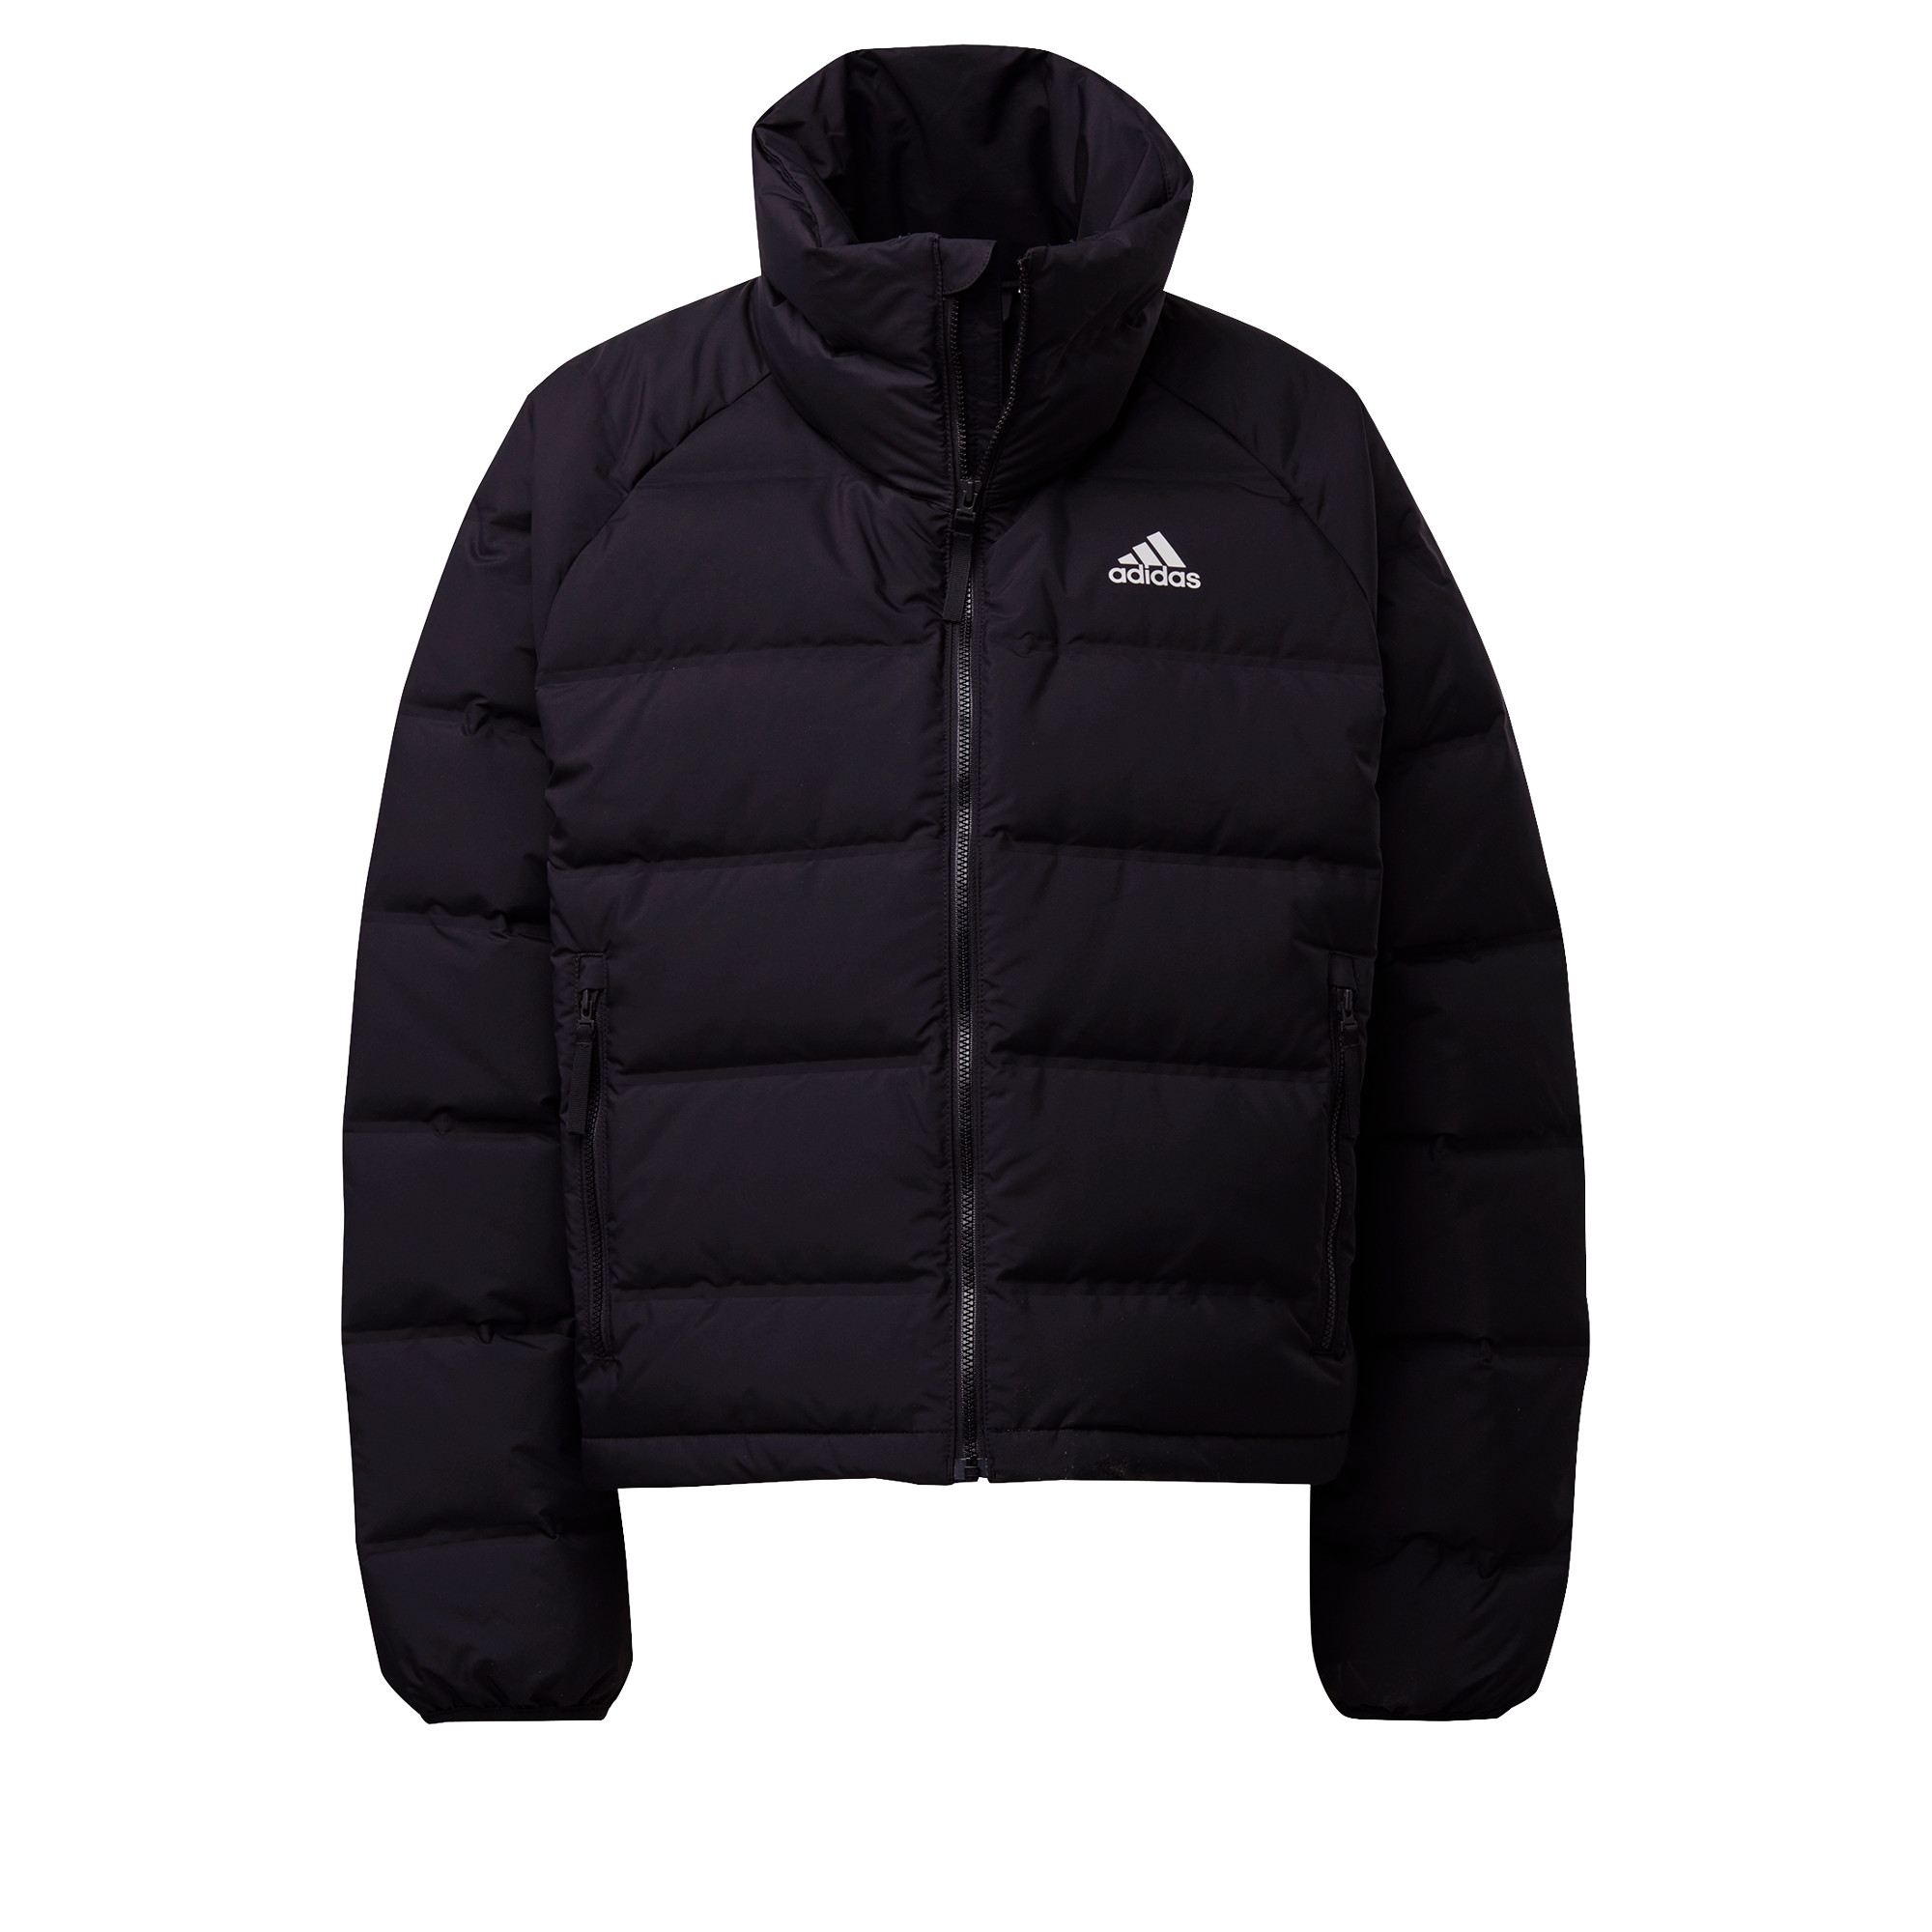 Adidas Women's Helionic Relaxed Fit Down Jacket BLACK